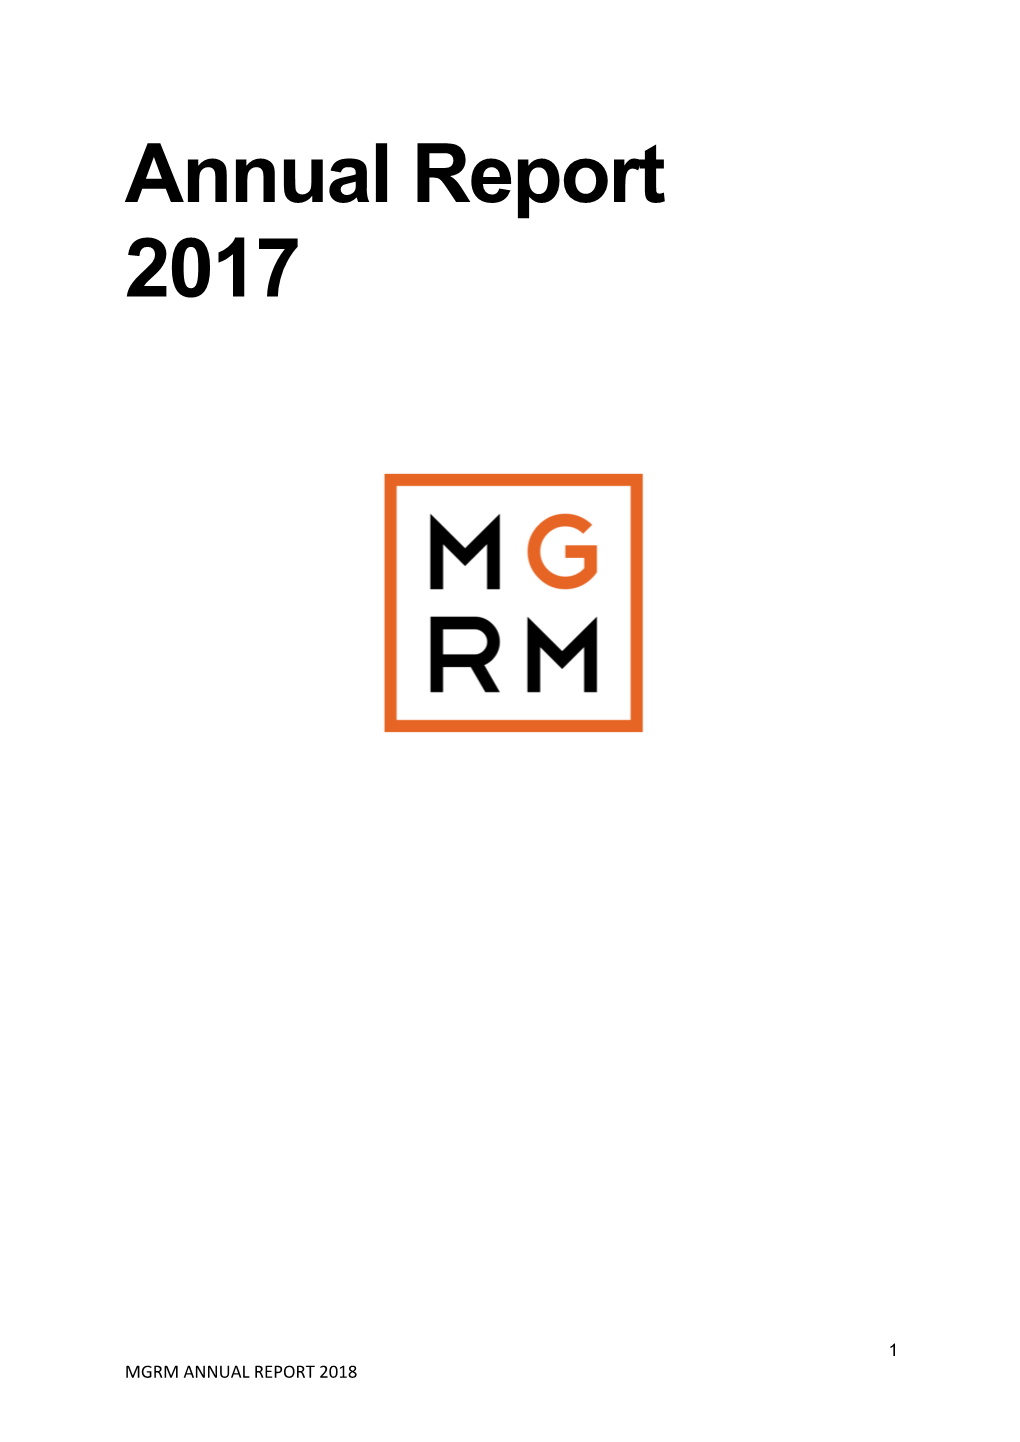 MGRM Annual Report 2017